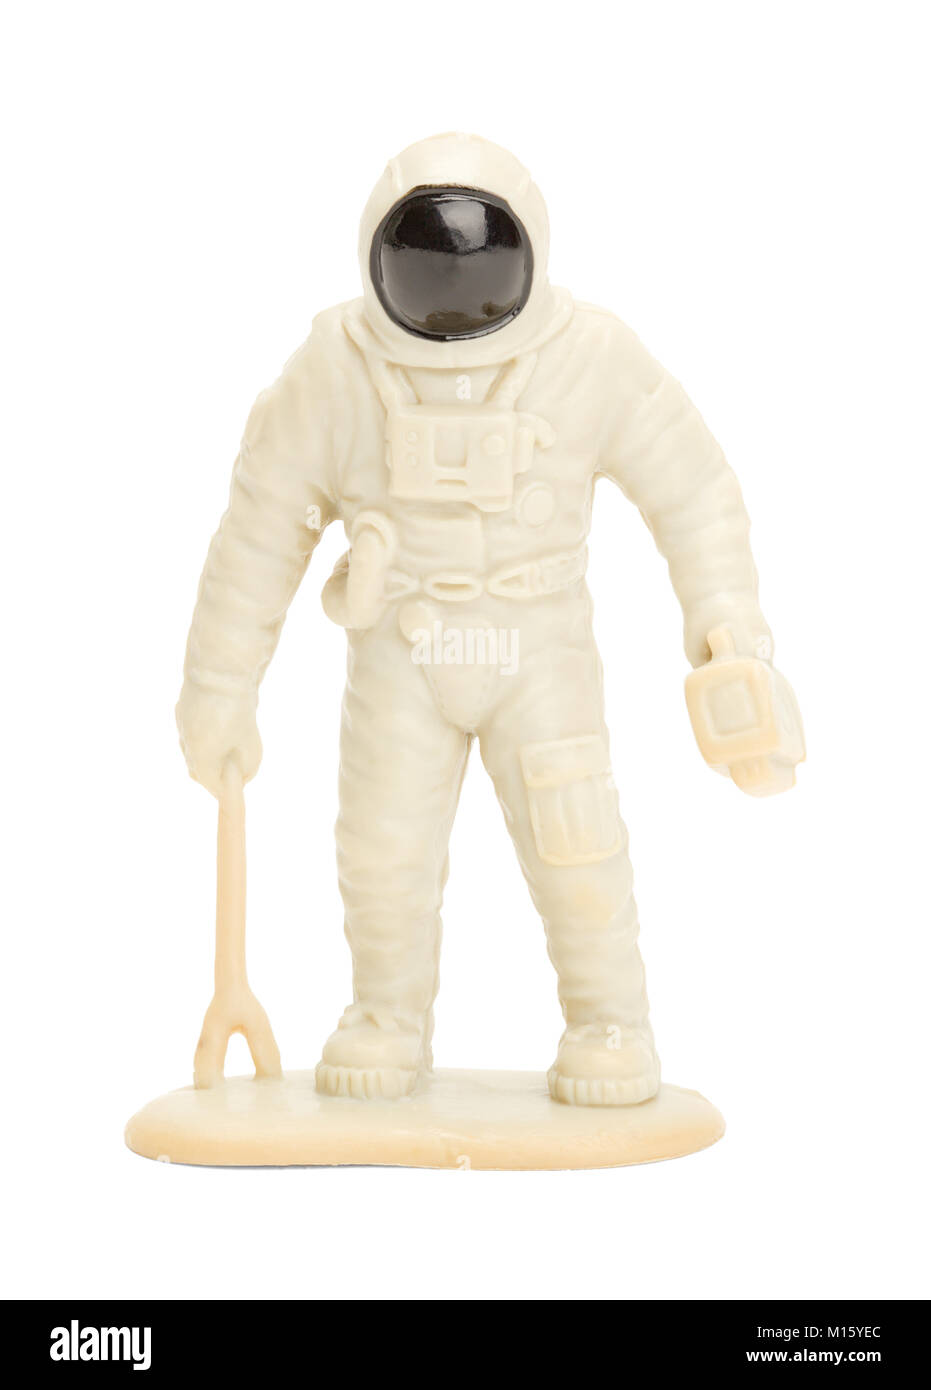 Plastic Toy Astronaut Isolated on a White Background. Stock Photo